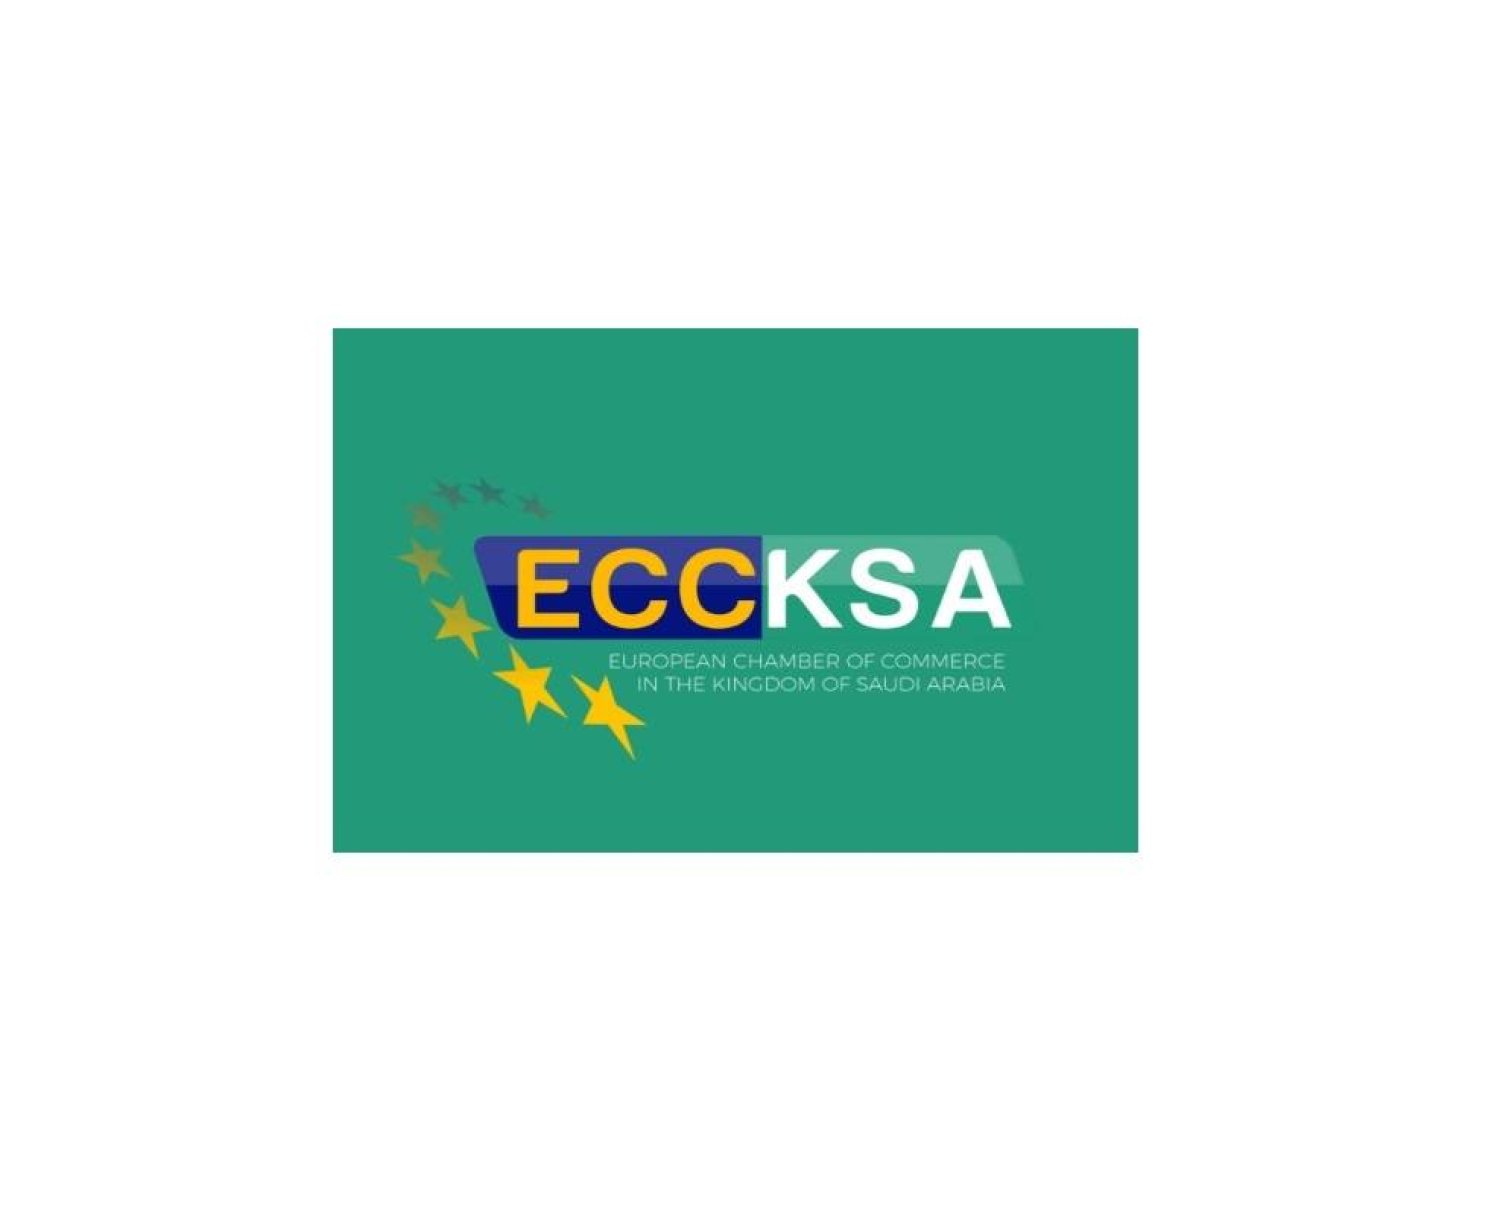 The first European Chamber of Commerce in the GCC region, ECCKSA